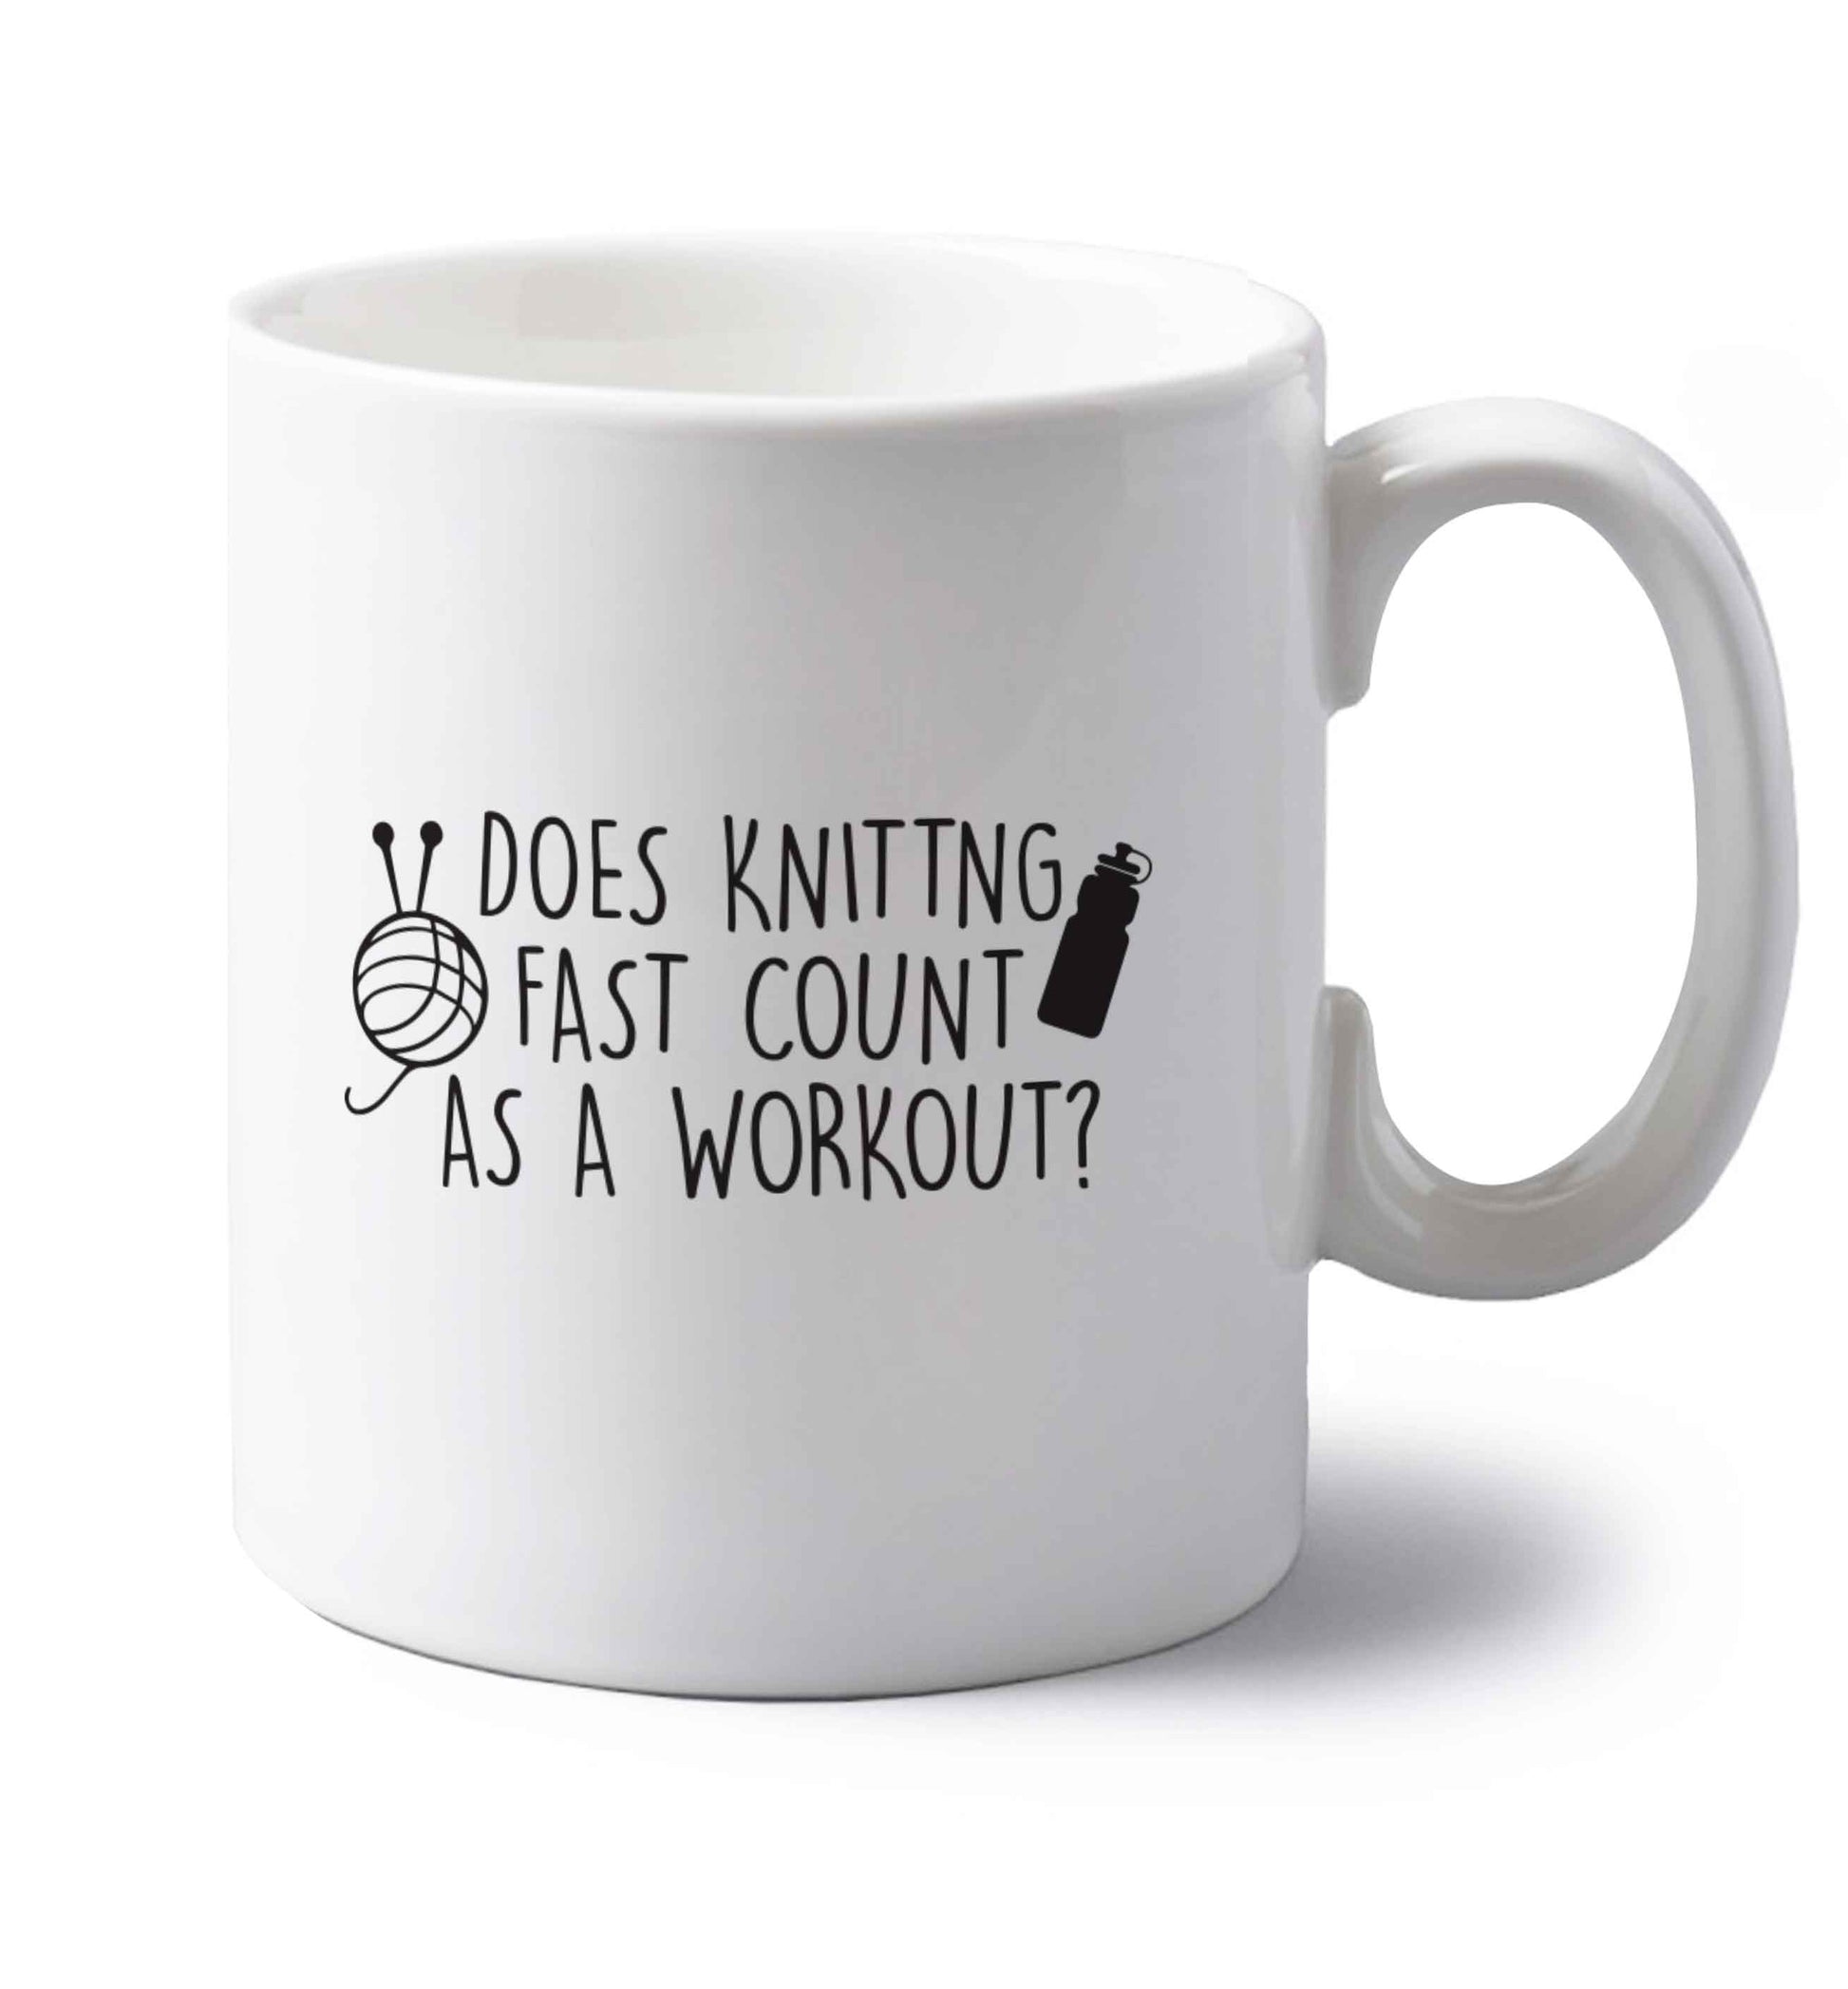 Does knitting fast count as a workout? left handed white ceramic mug 